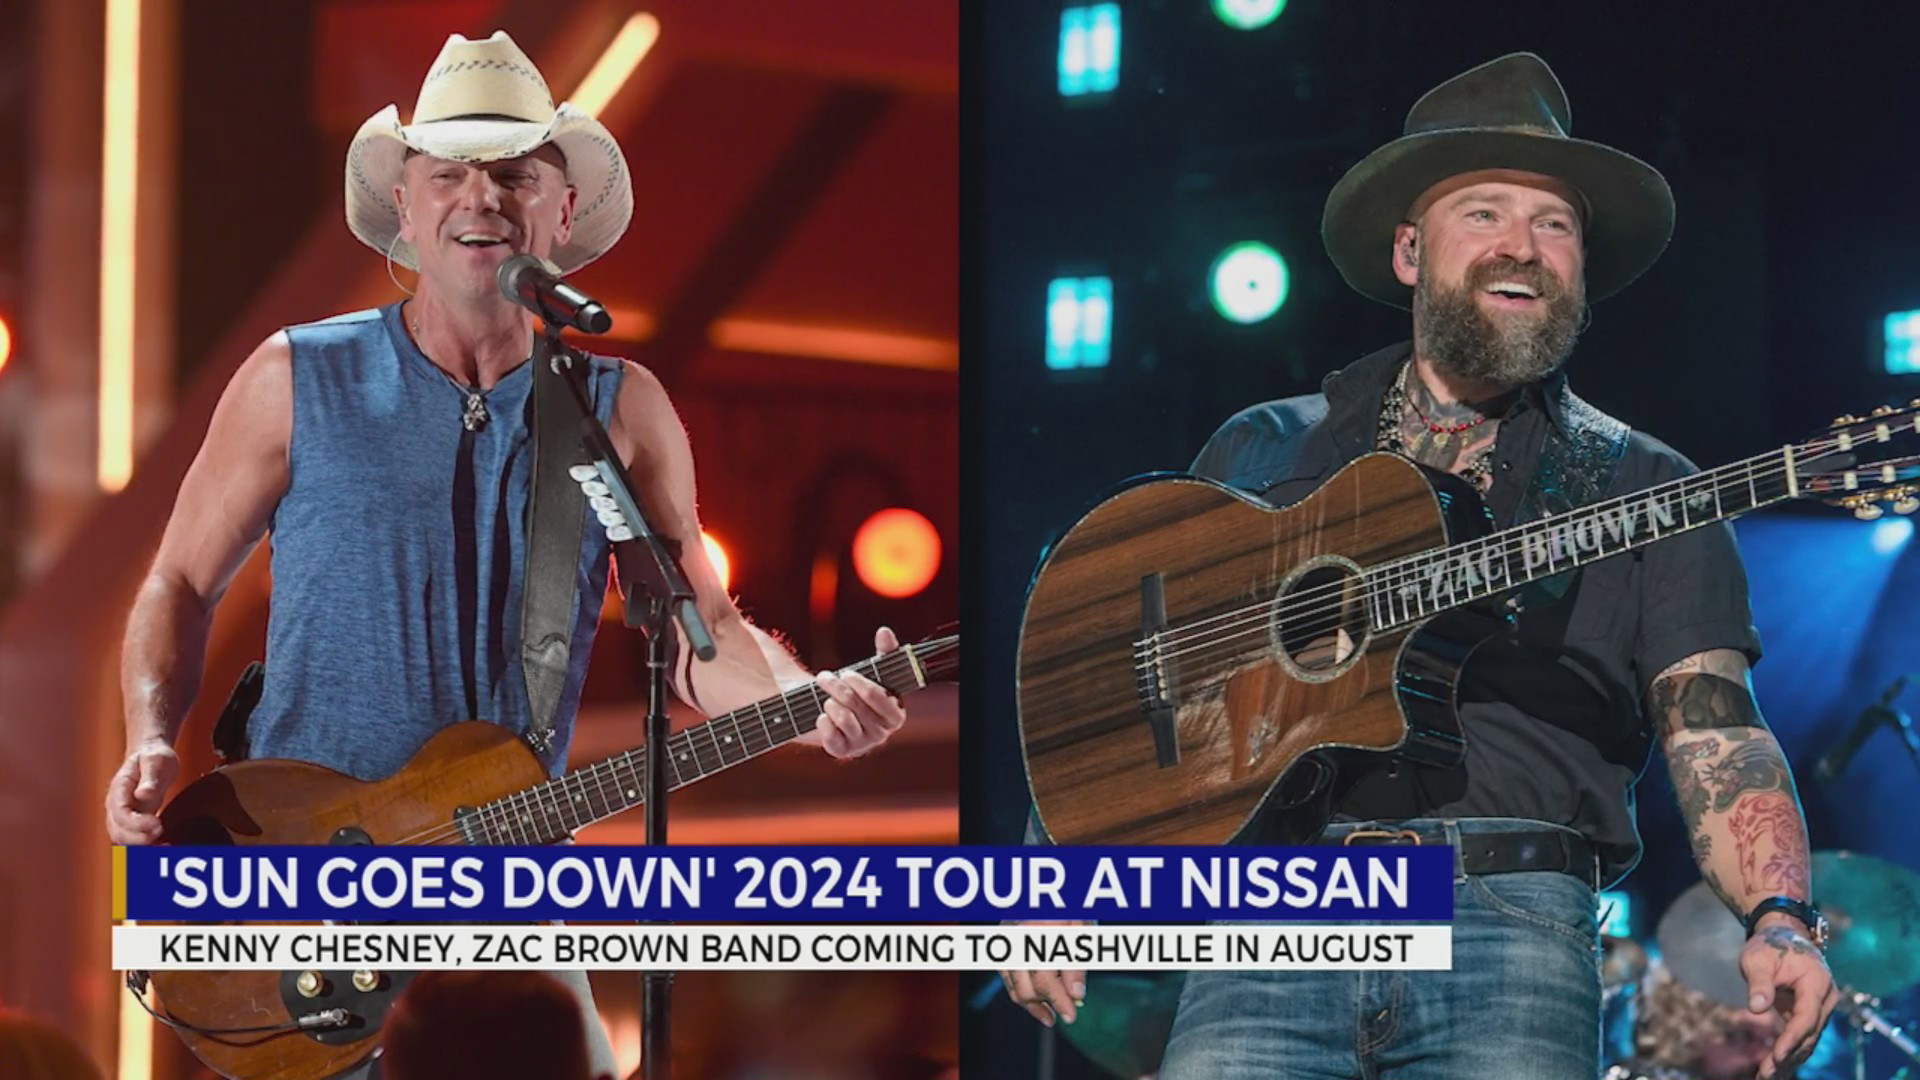 Kenny Chesney, Zac Brown Band coming to Nashville in August 2024